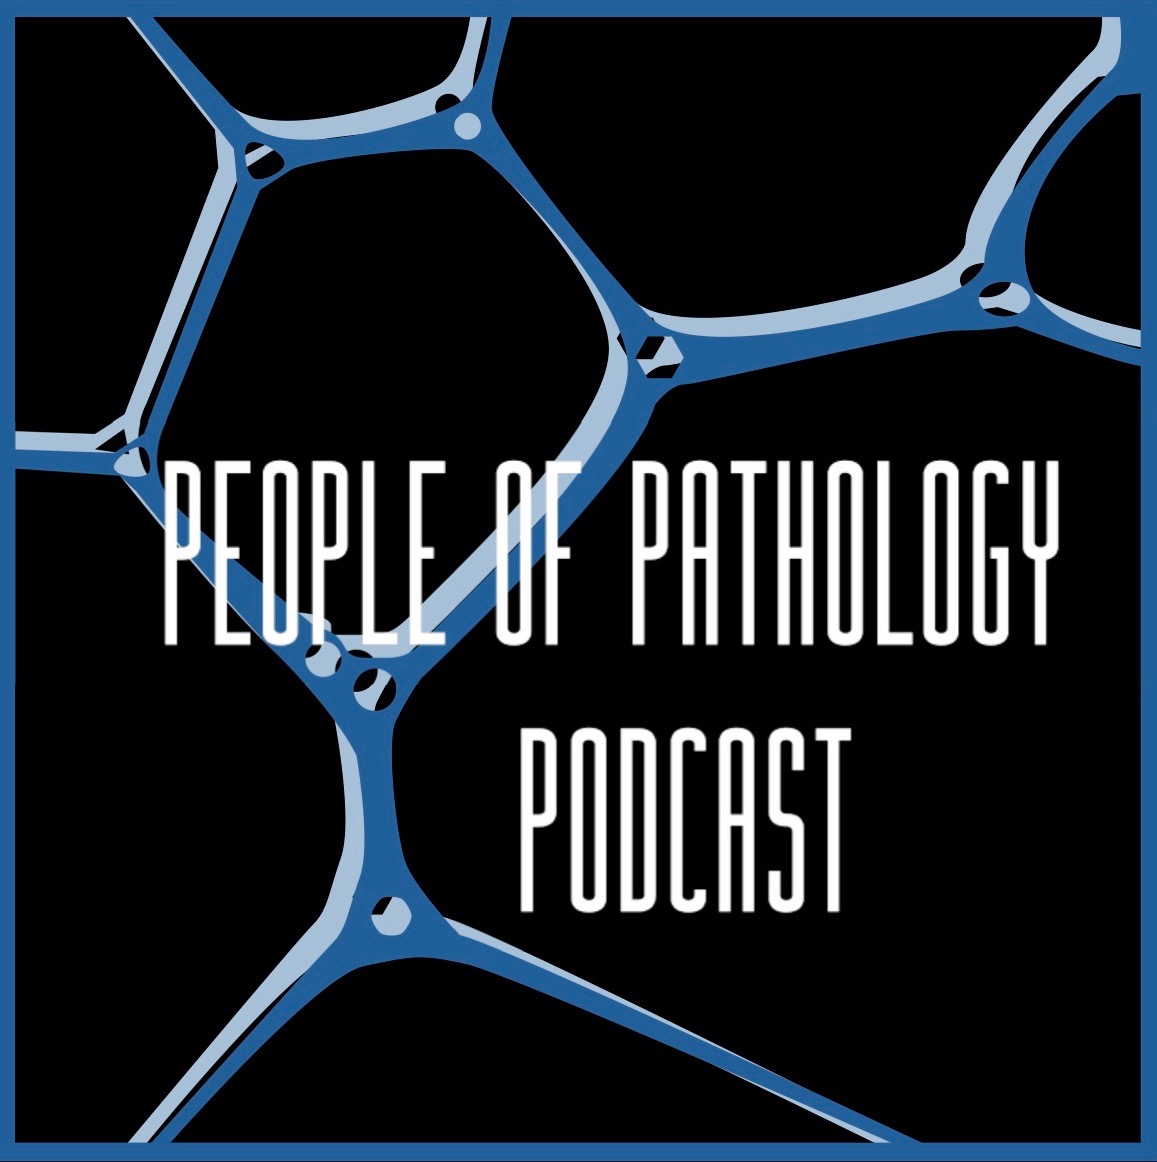 Episode 37: Dr Nicola Parry – Veterinary Pathology and Mentoring